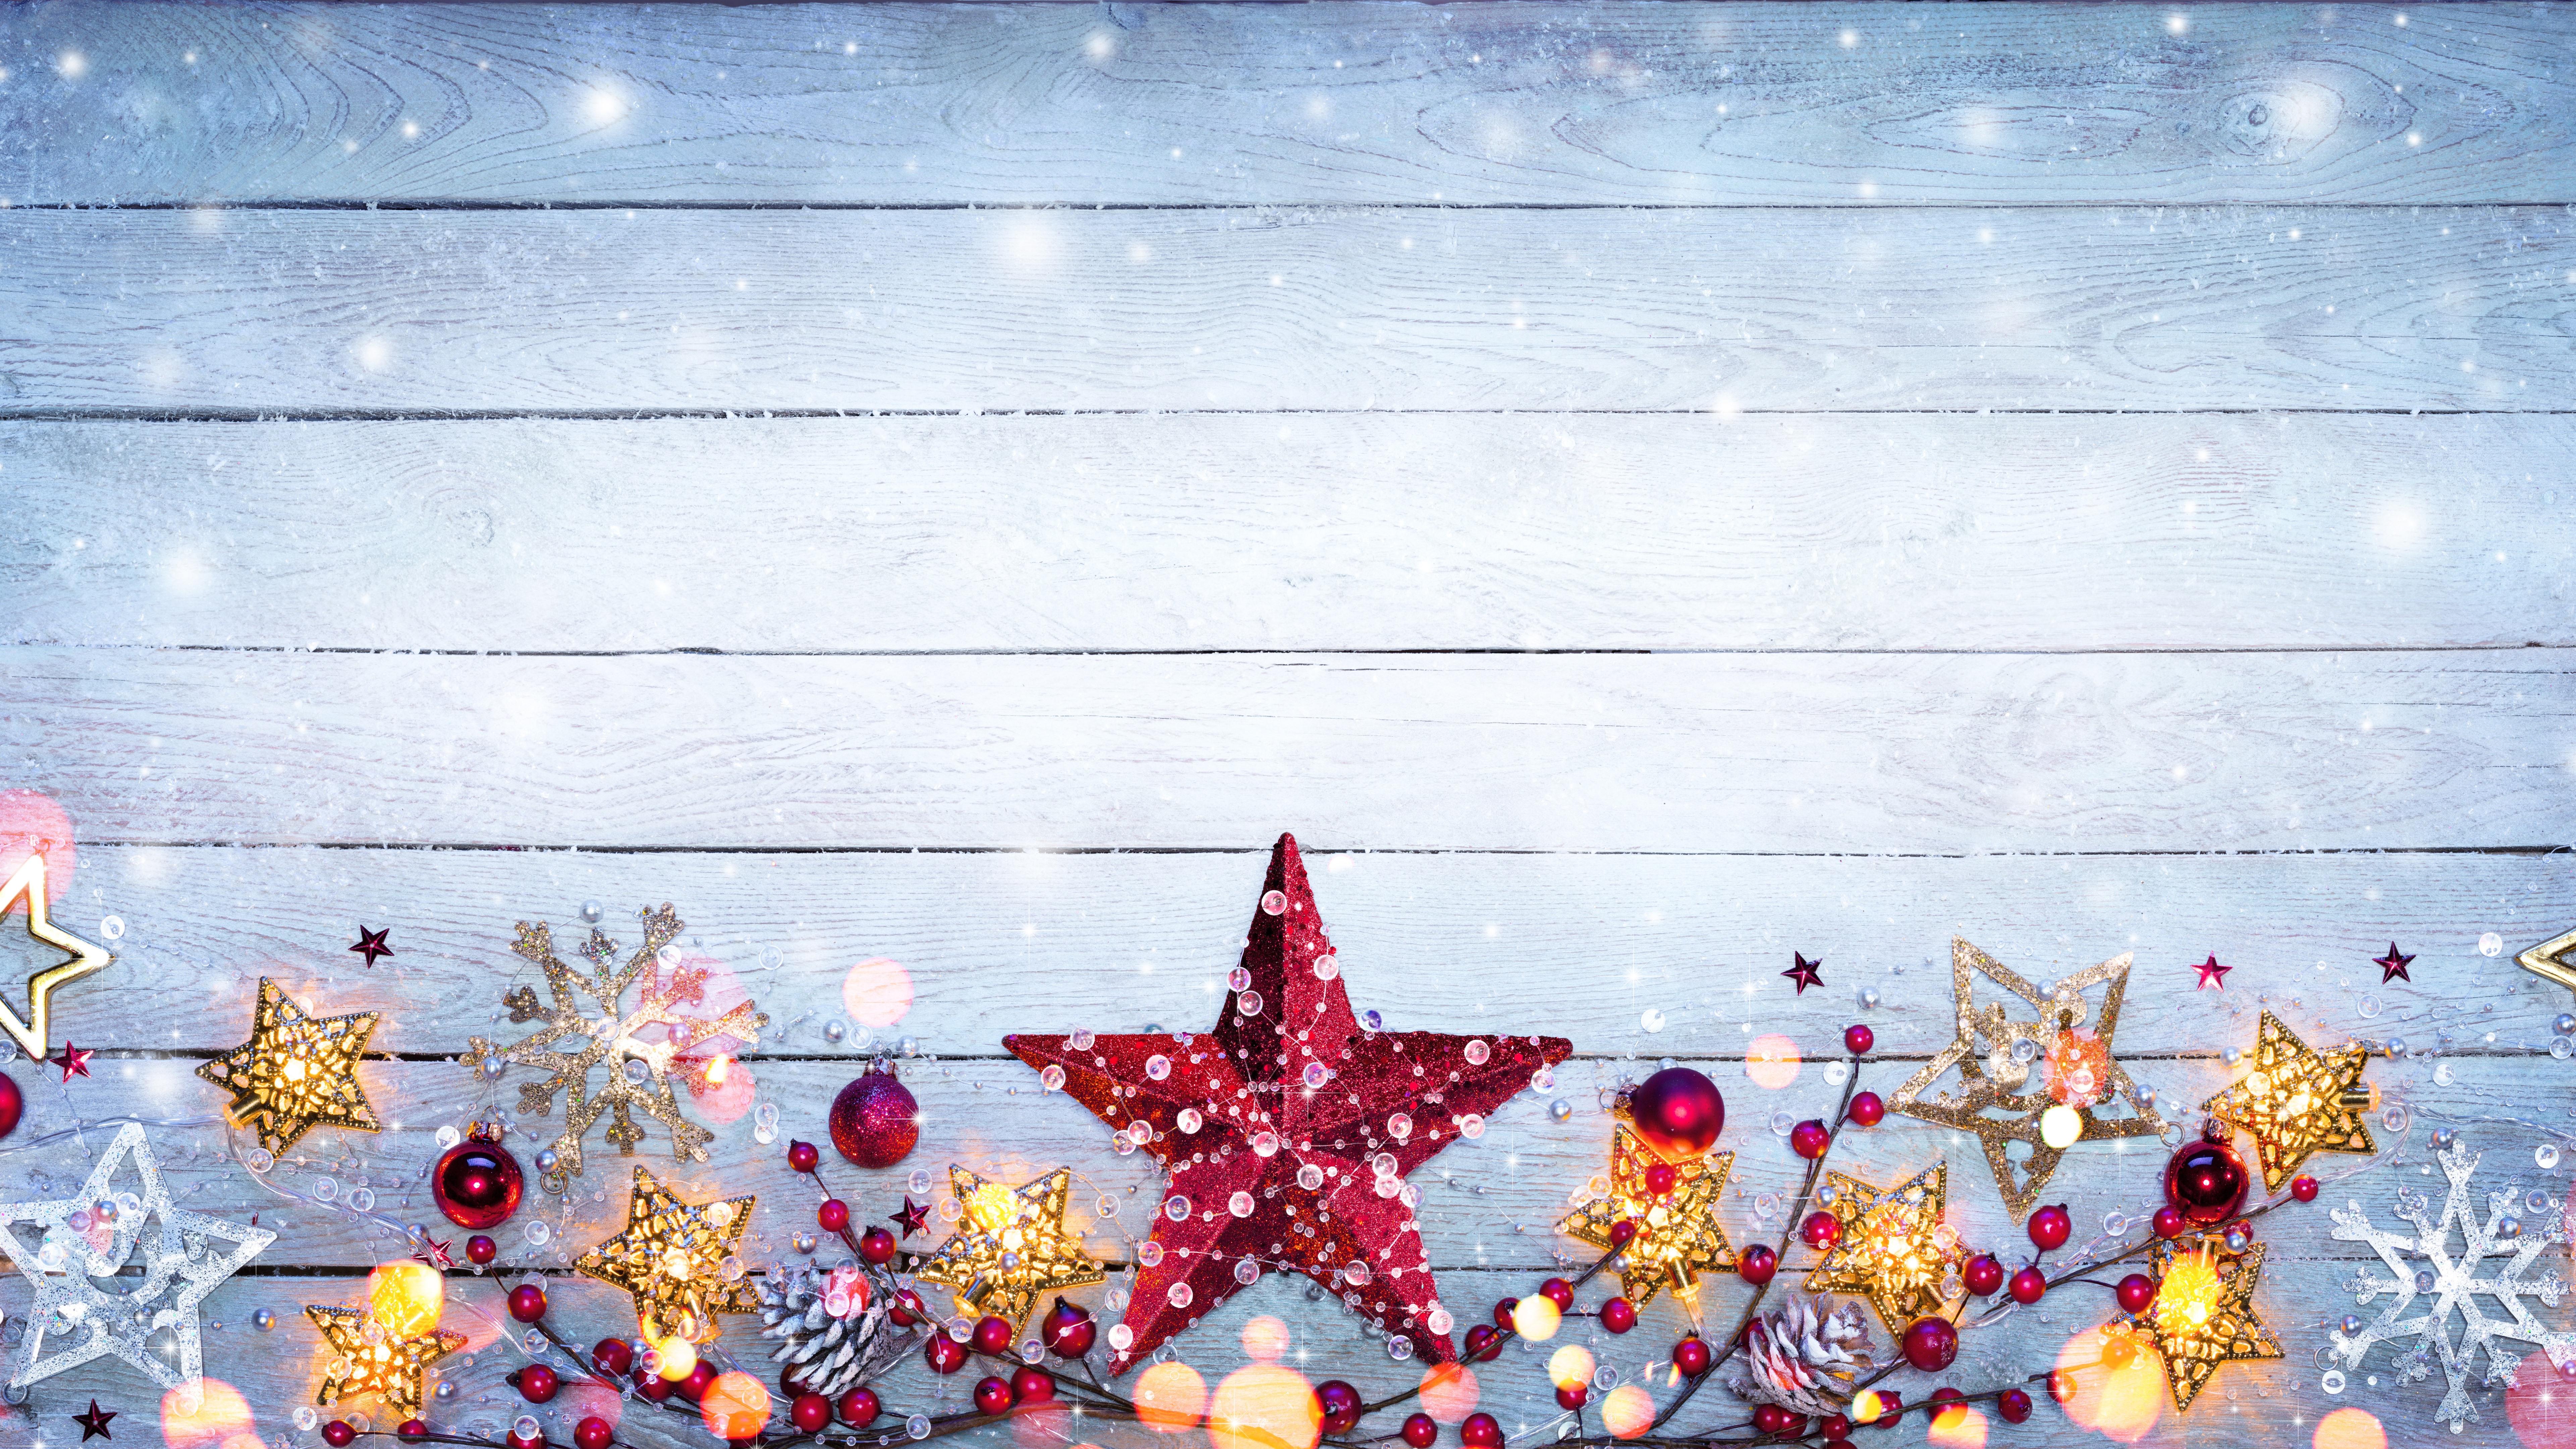 Wallpaper Merry Christmas, stars, berries, snowflake, decoration 7680x4320 UHD 8K Picture, Image